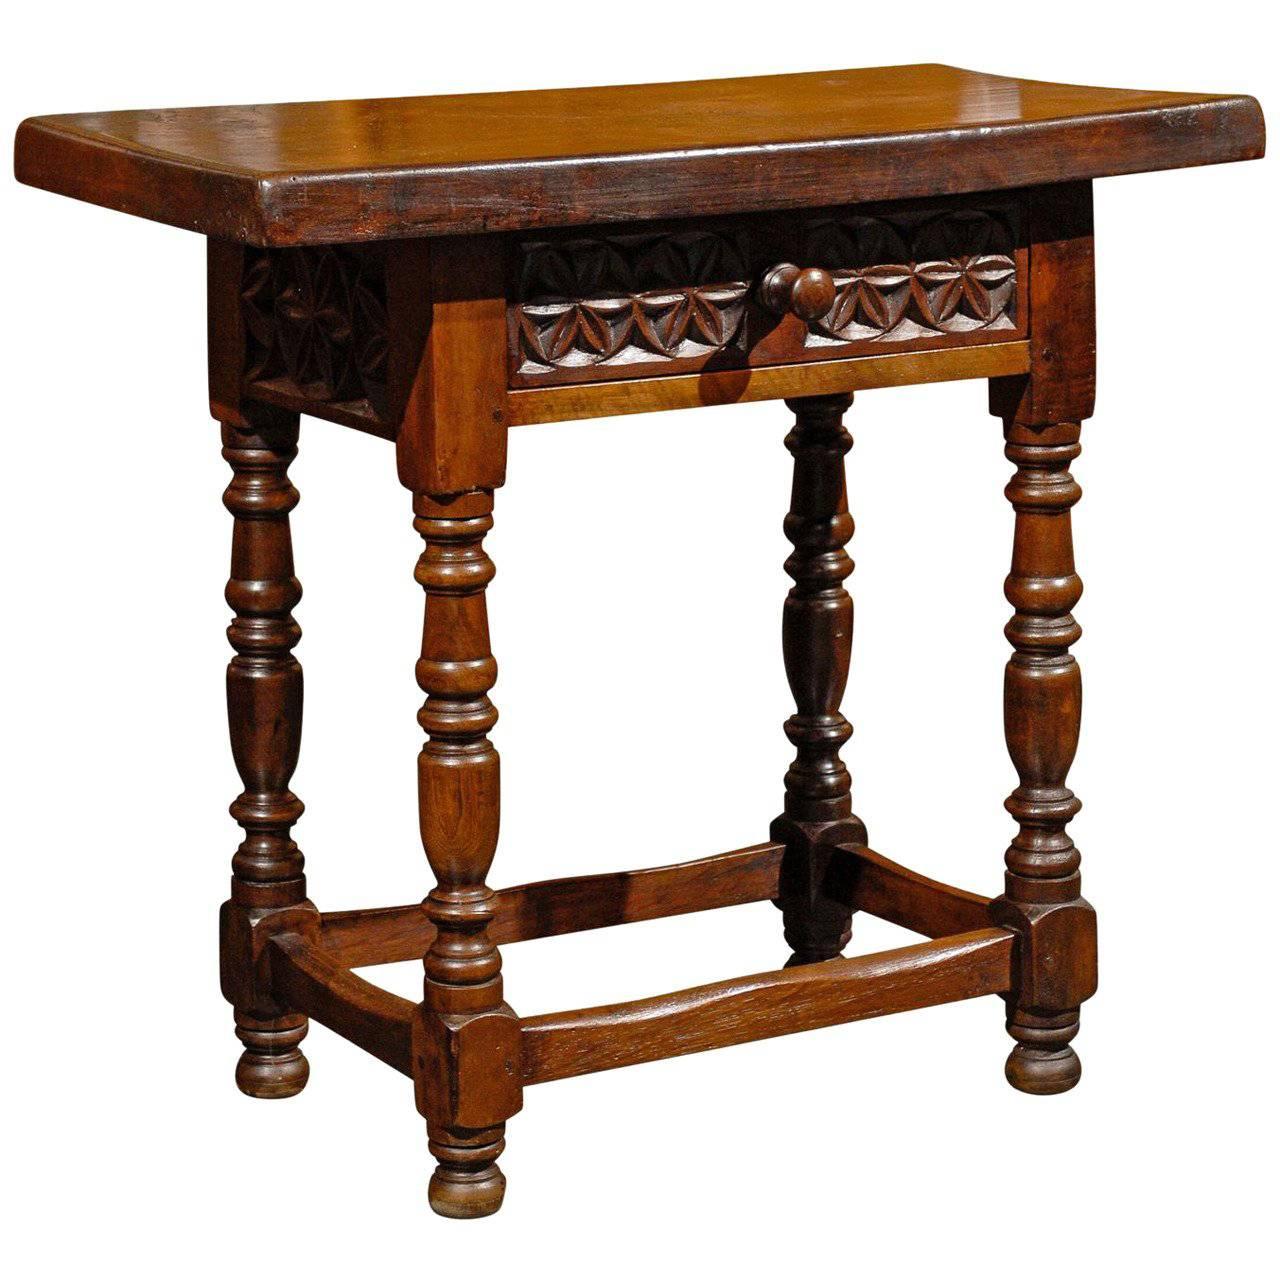 Spanish Petite Side Table with Carved Drawer and Turned Legs, circa 1880